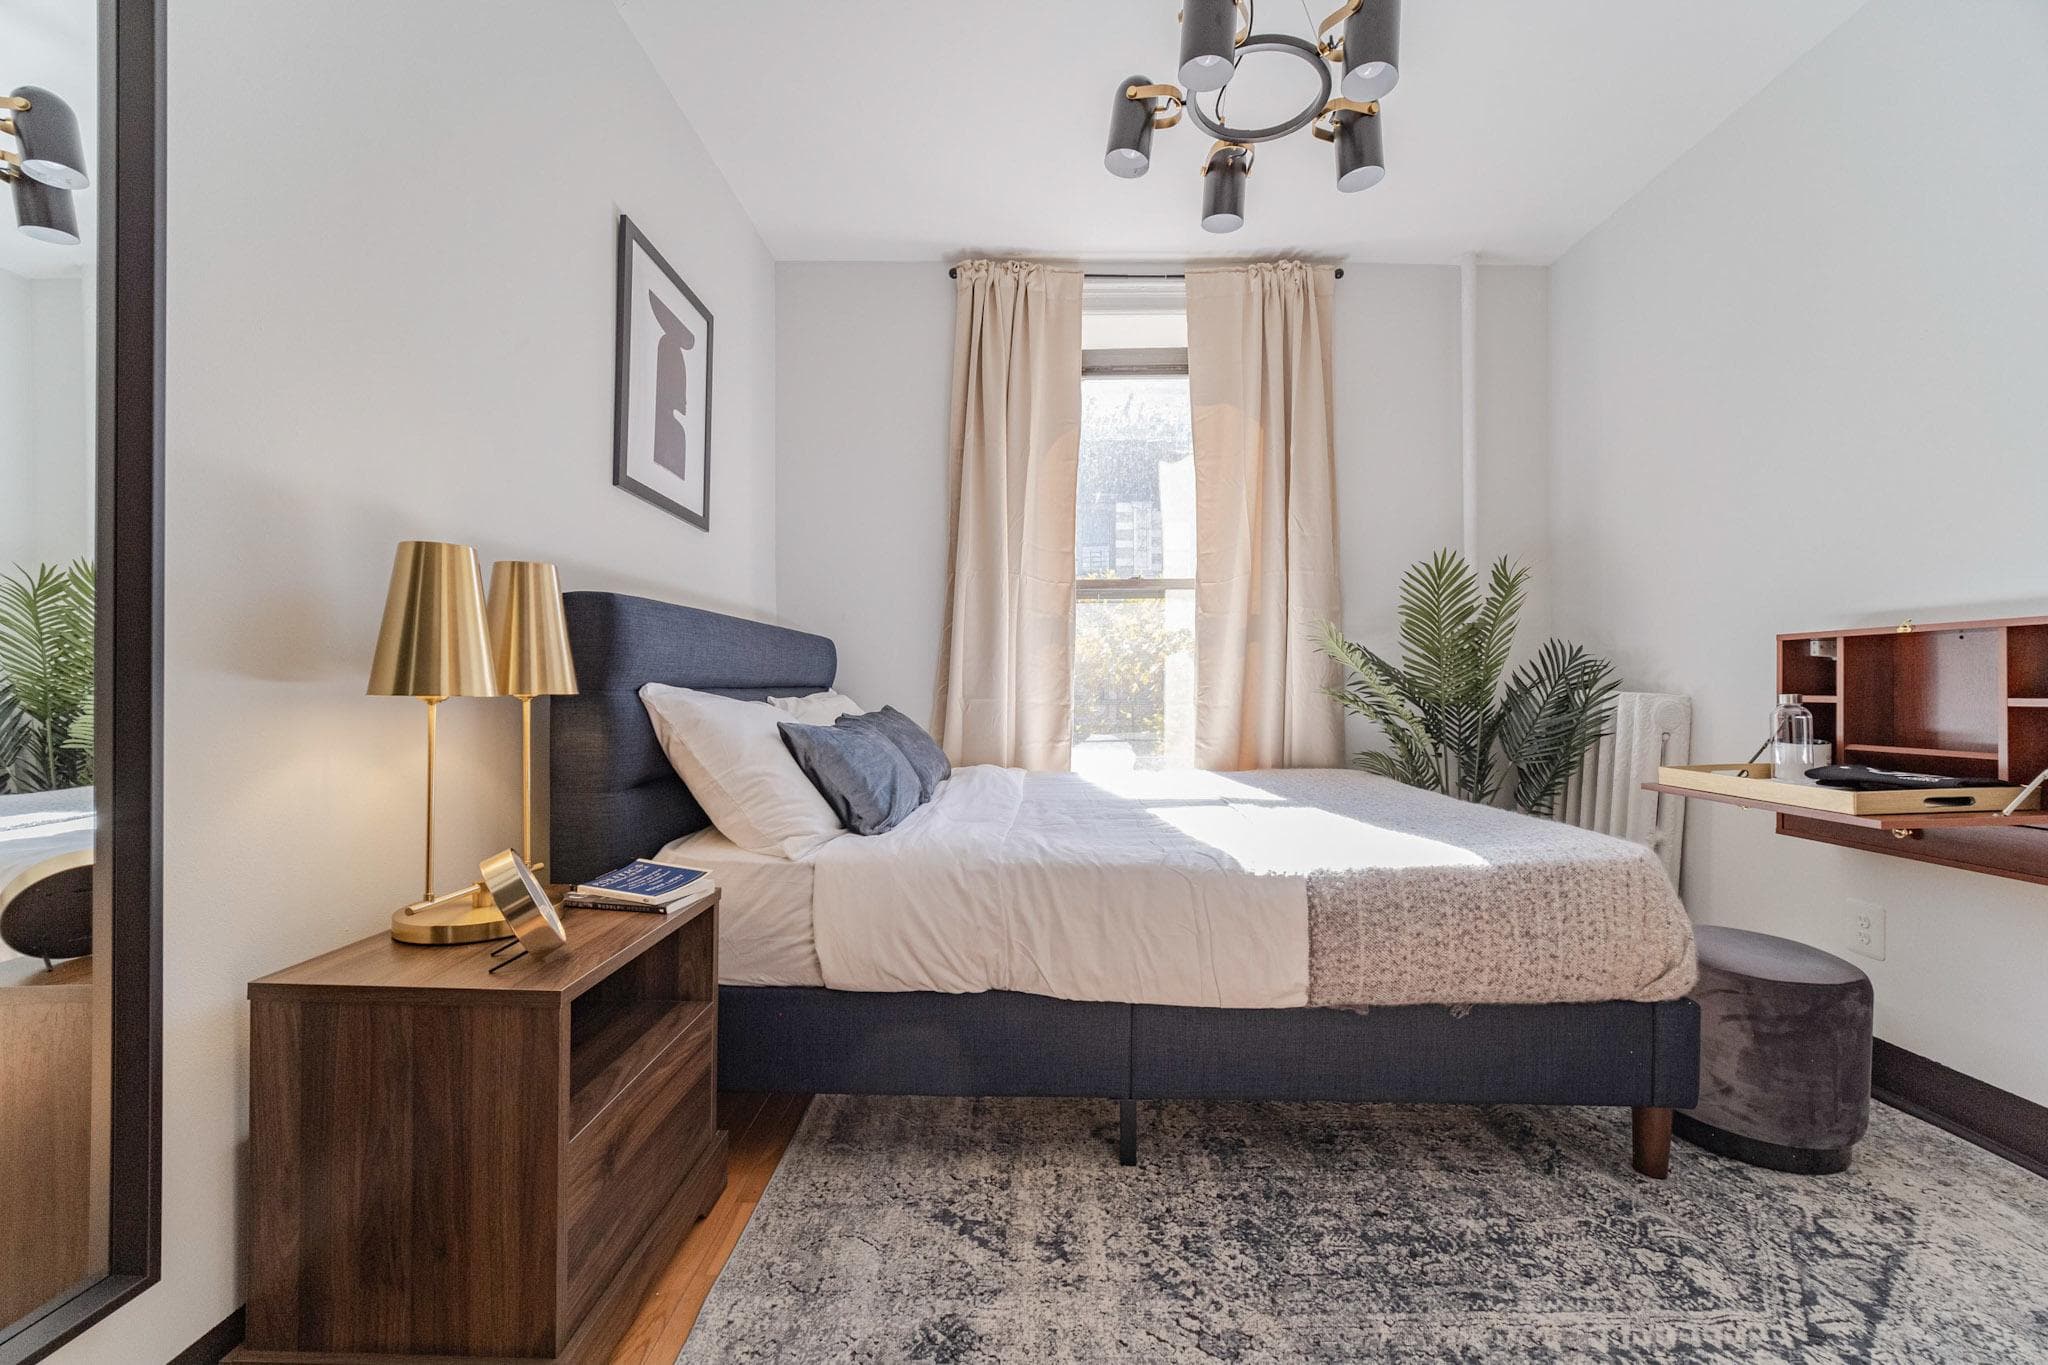 Photo 9 of #579: Queen Bedroom A at June Homes